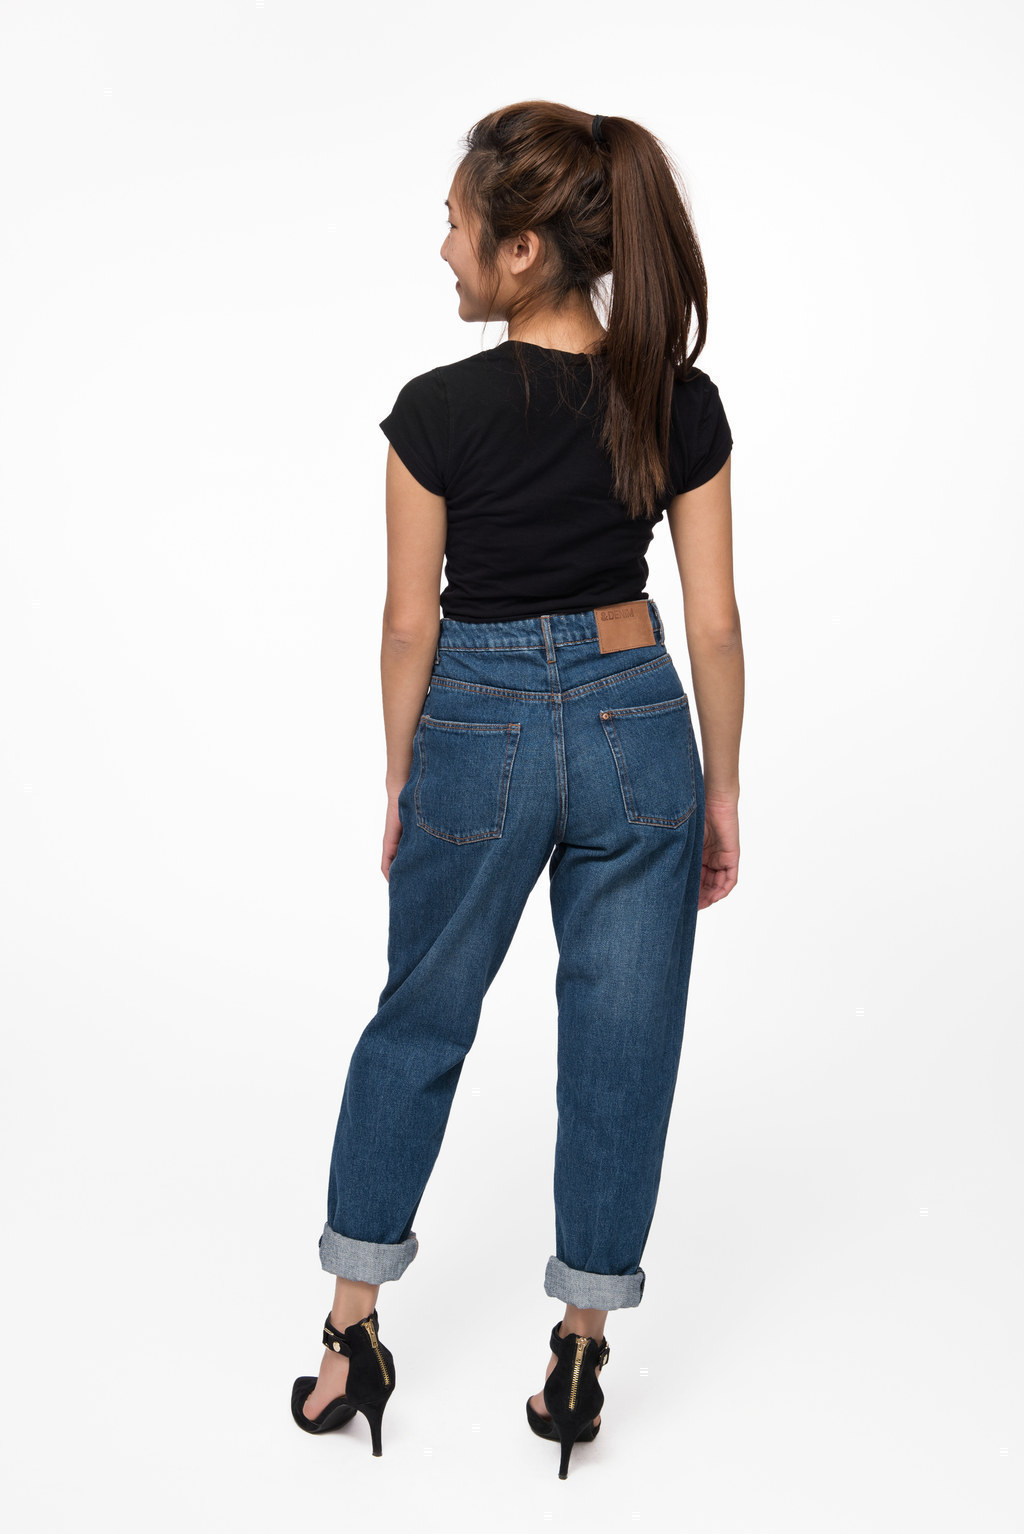 h and m mum jeans